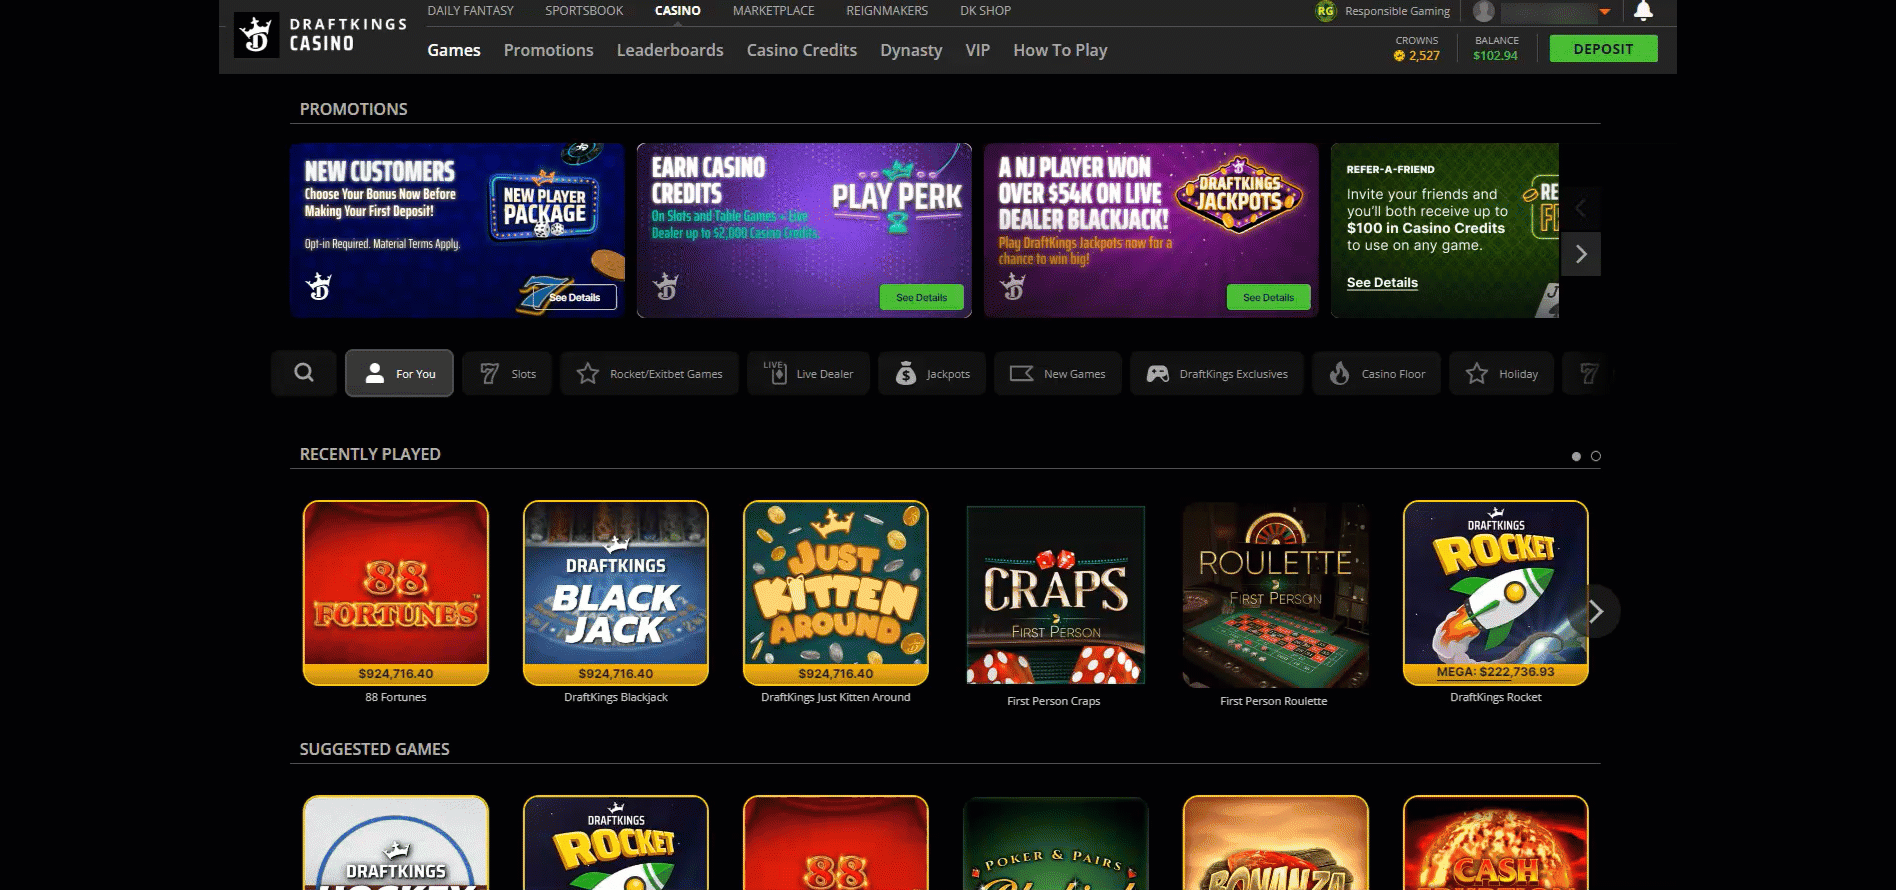 How to set deposit limits on DraftKings Casino website